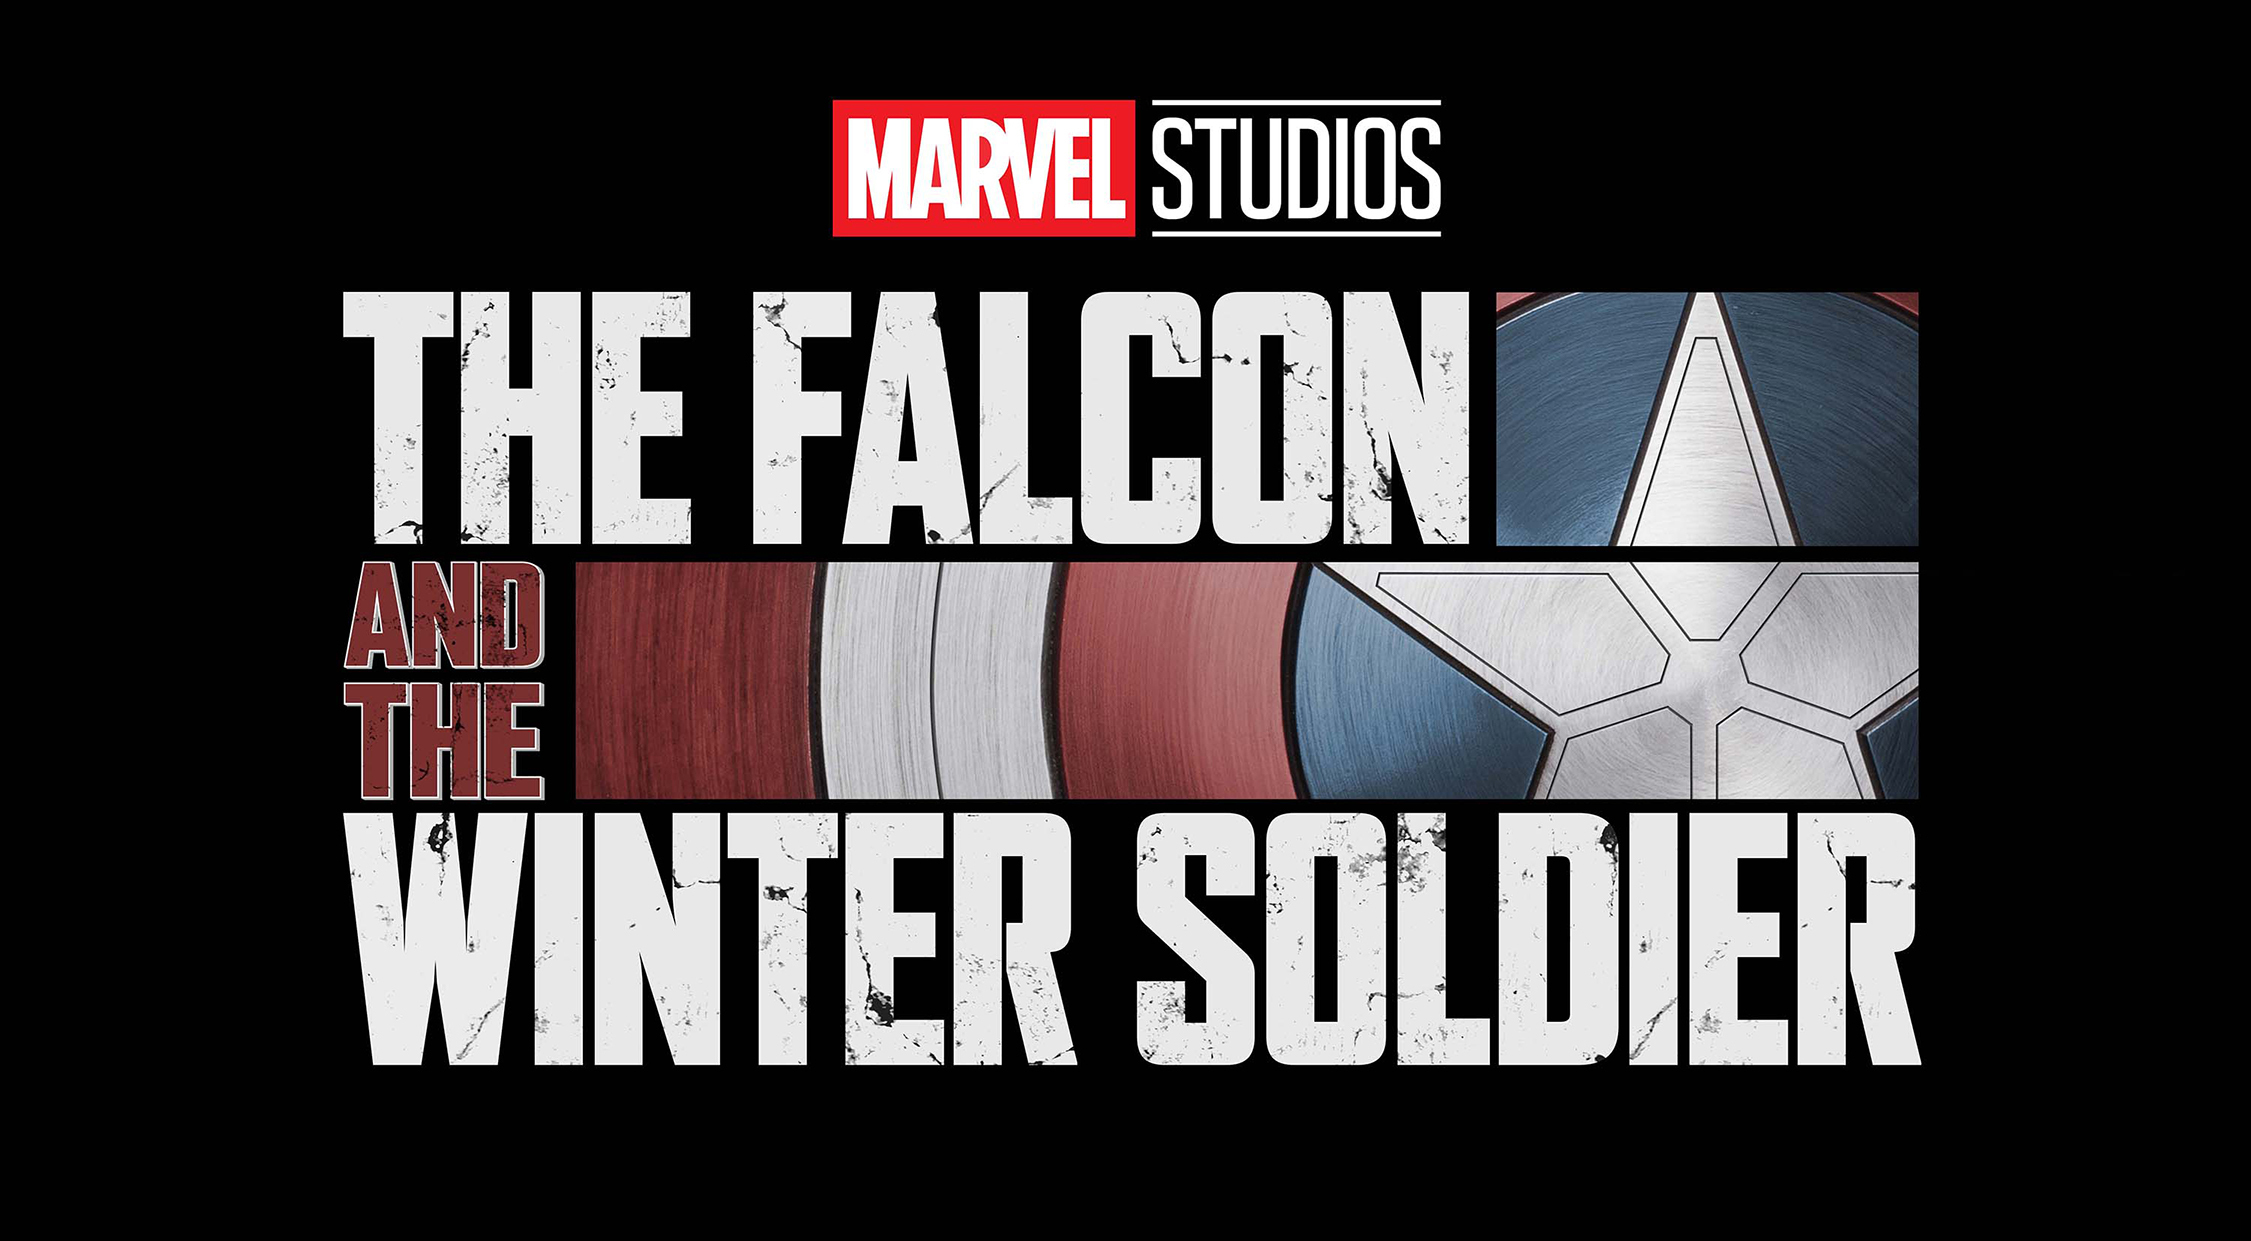 Episode 1 Of ‘The Falcon And The Winter Soldier’ Sets Up Another Promising Series For The MCU – Review